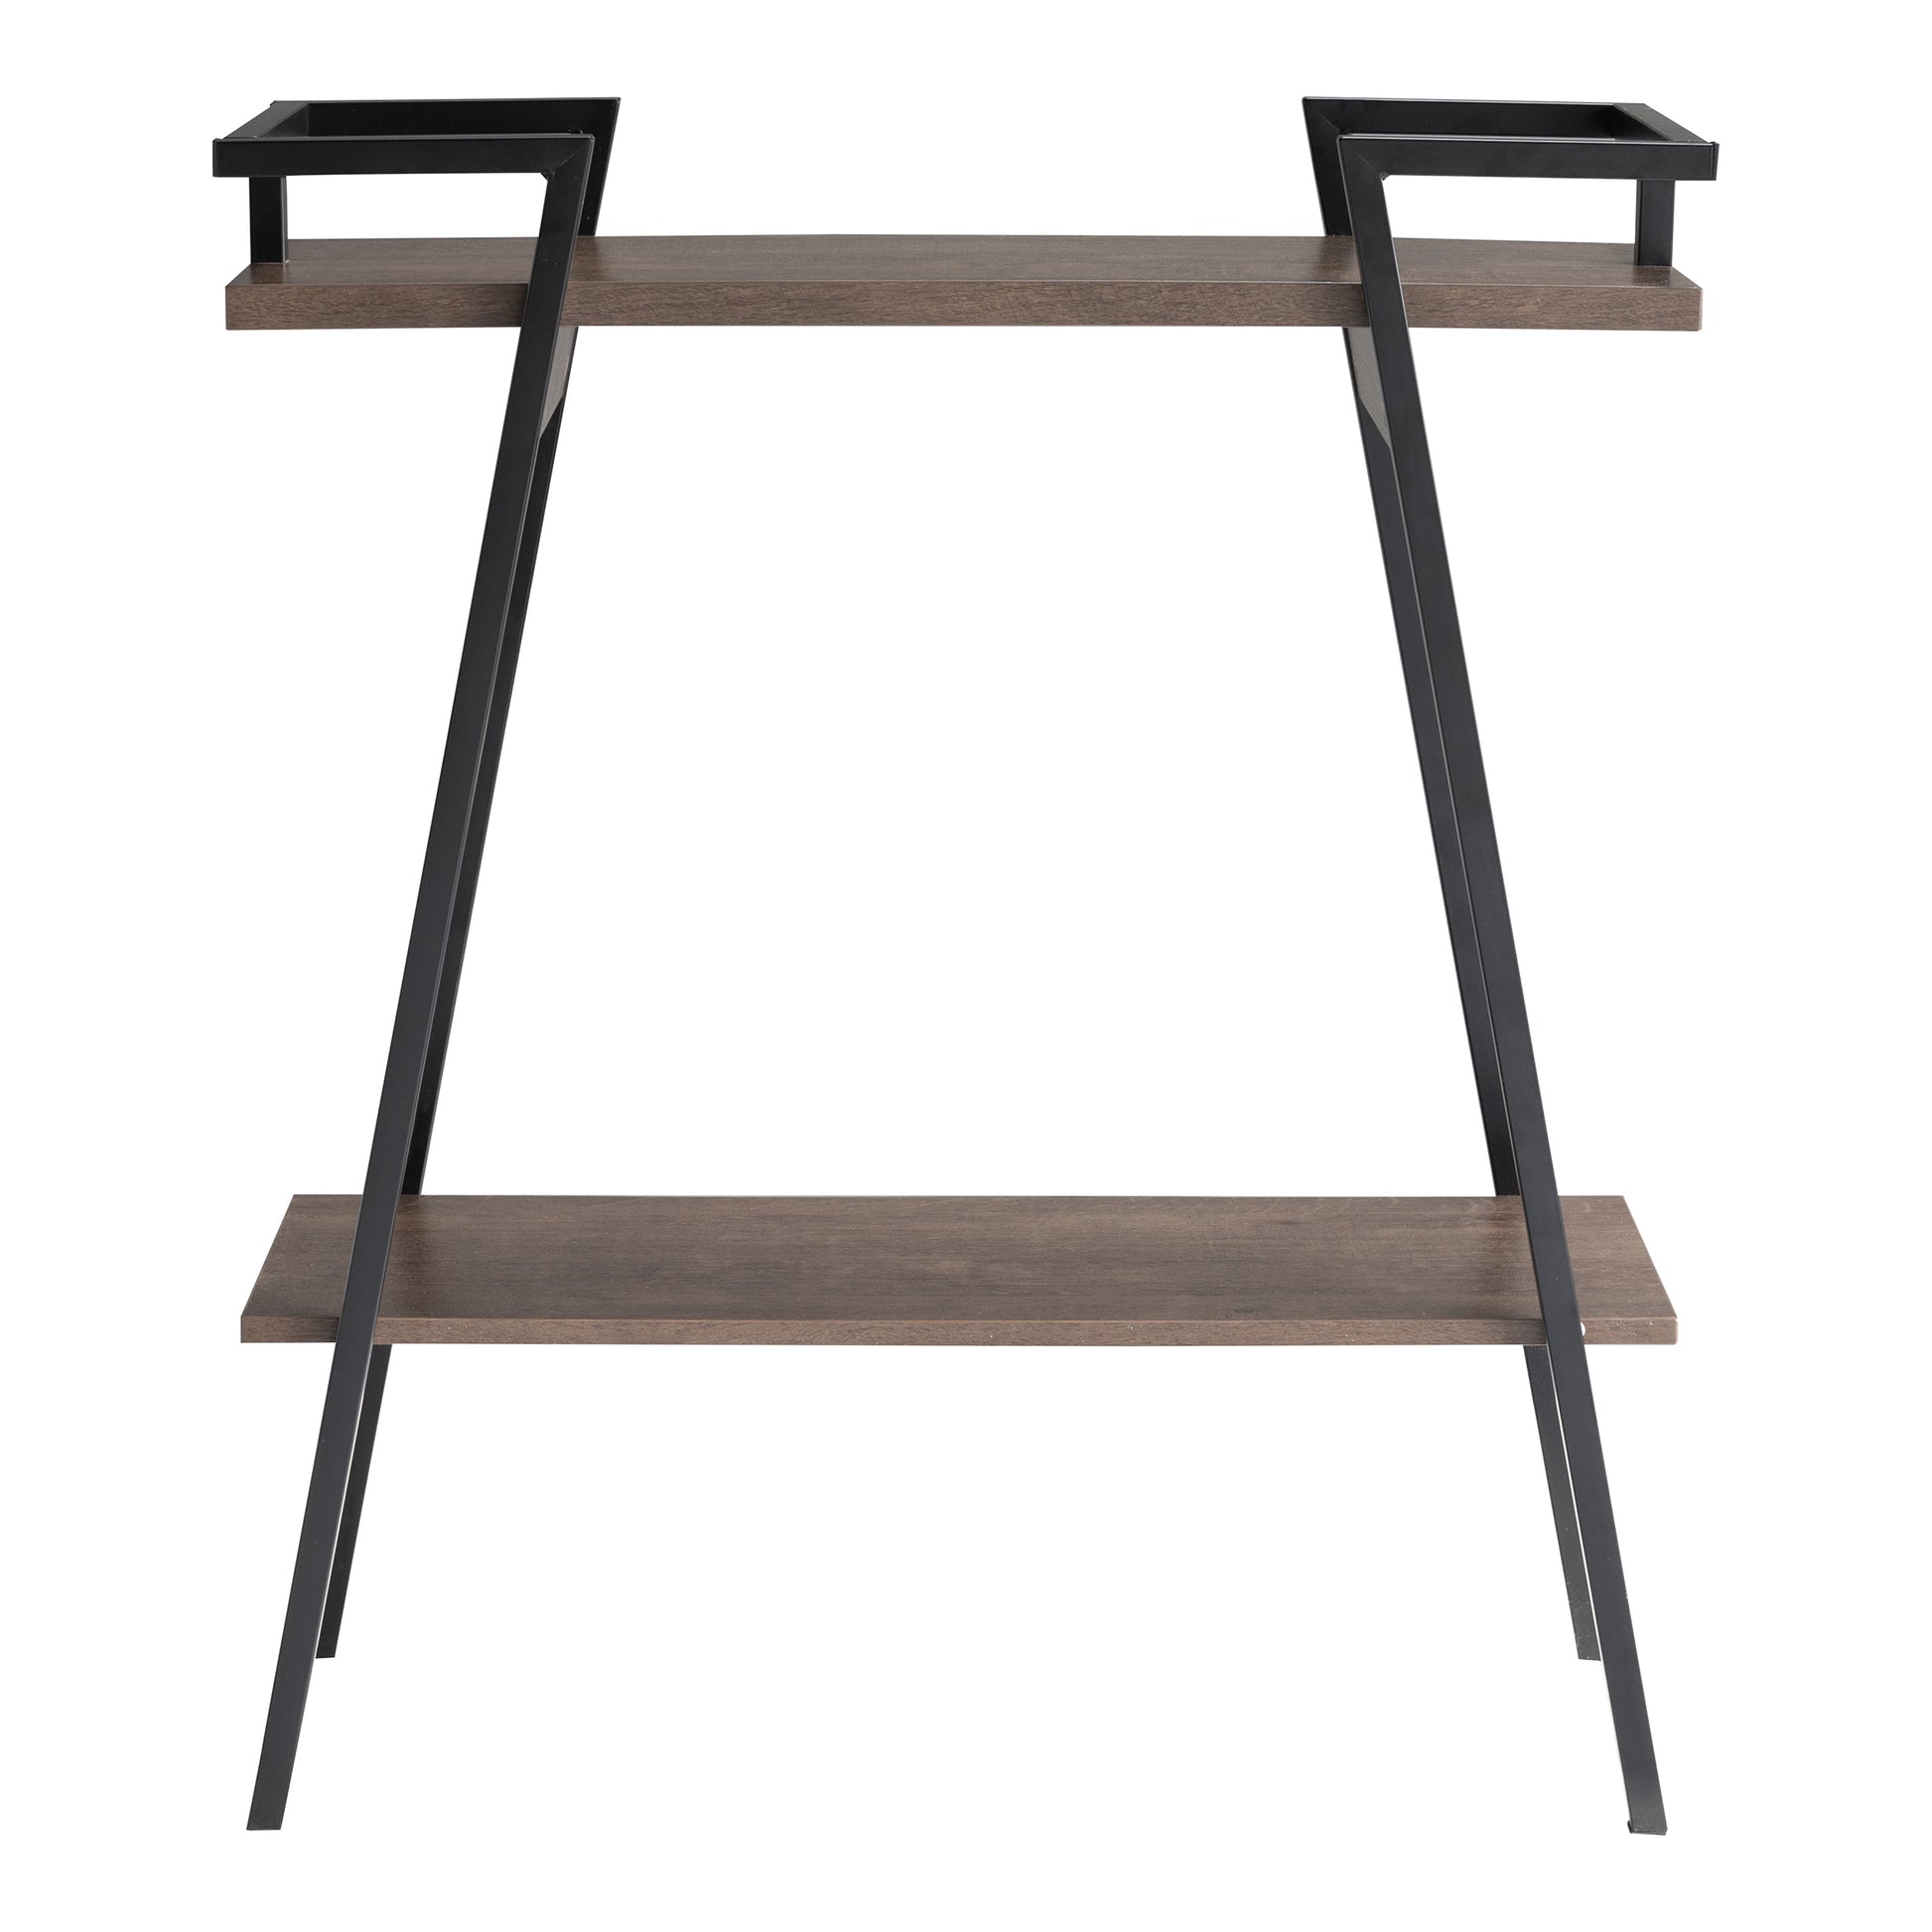 Front-facing urban industrial walnut oak and black two-shelf geometric console table on a white background